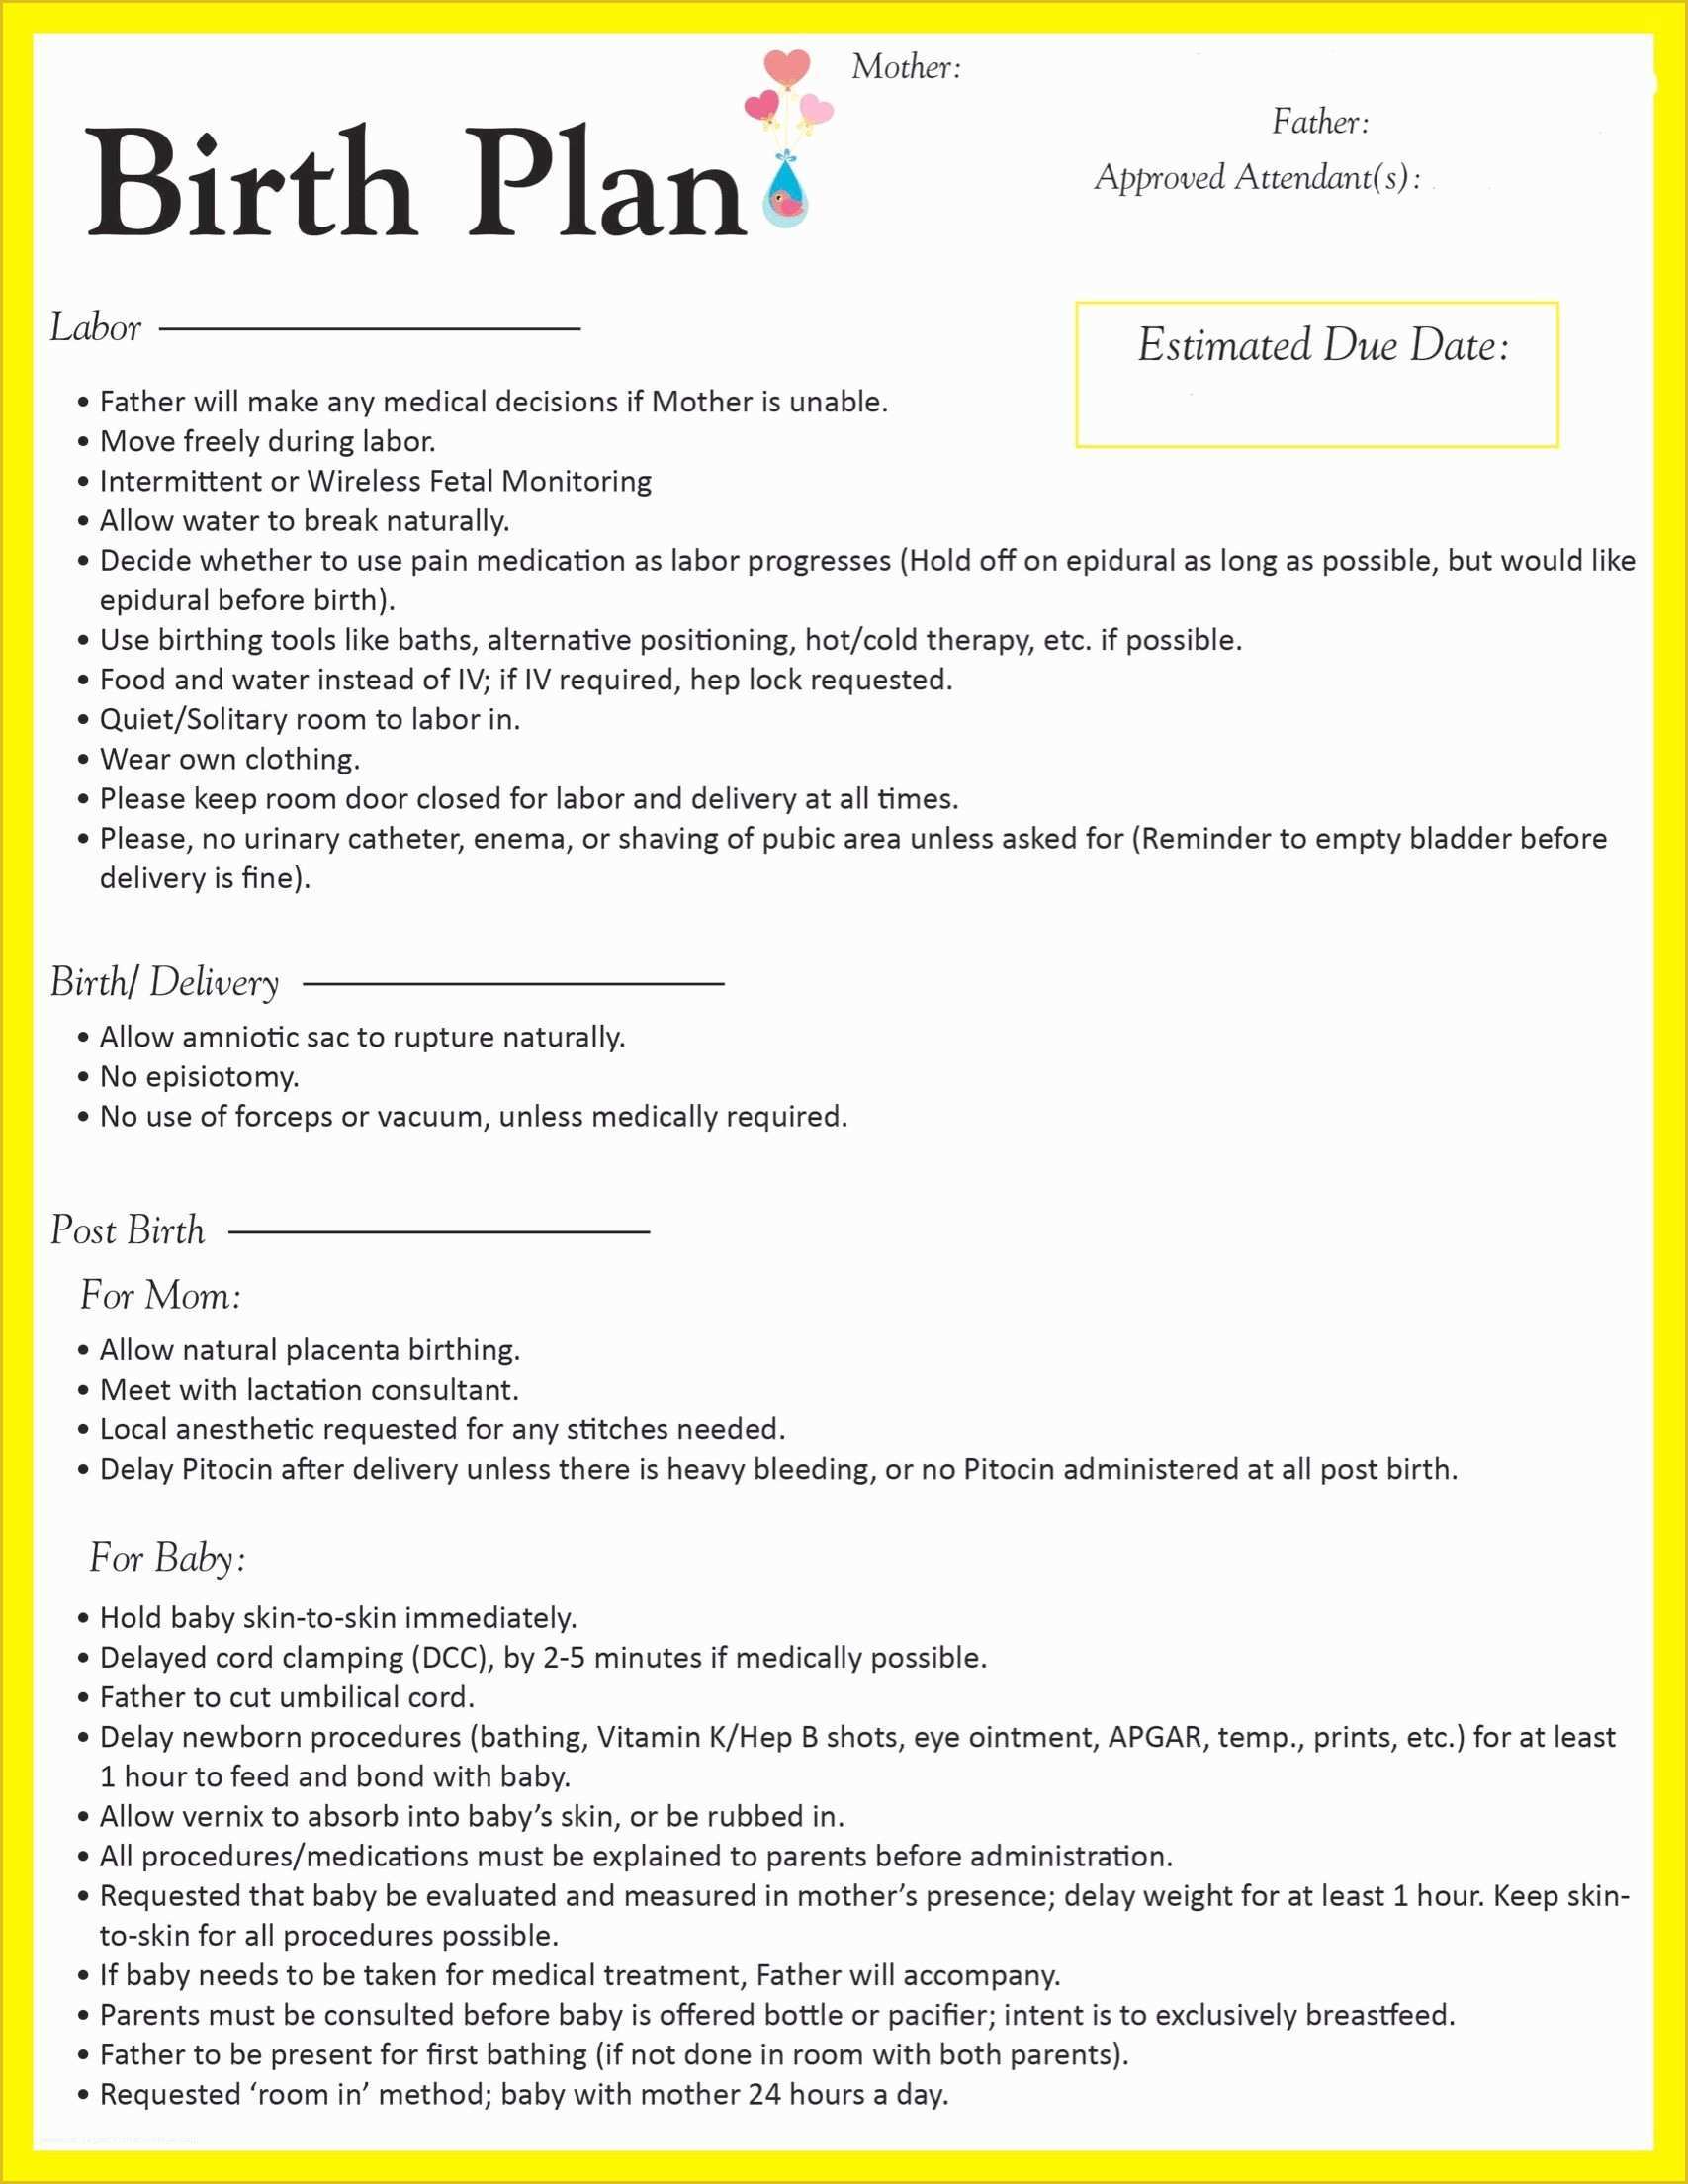 Free Printable Birth Plan Template Of Birth Plan Going to Make some Edits but This is A Good